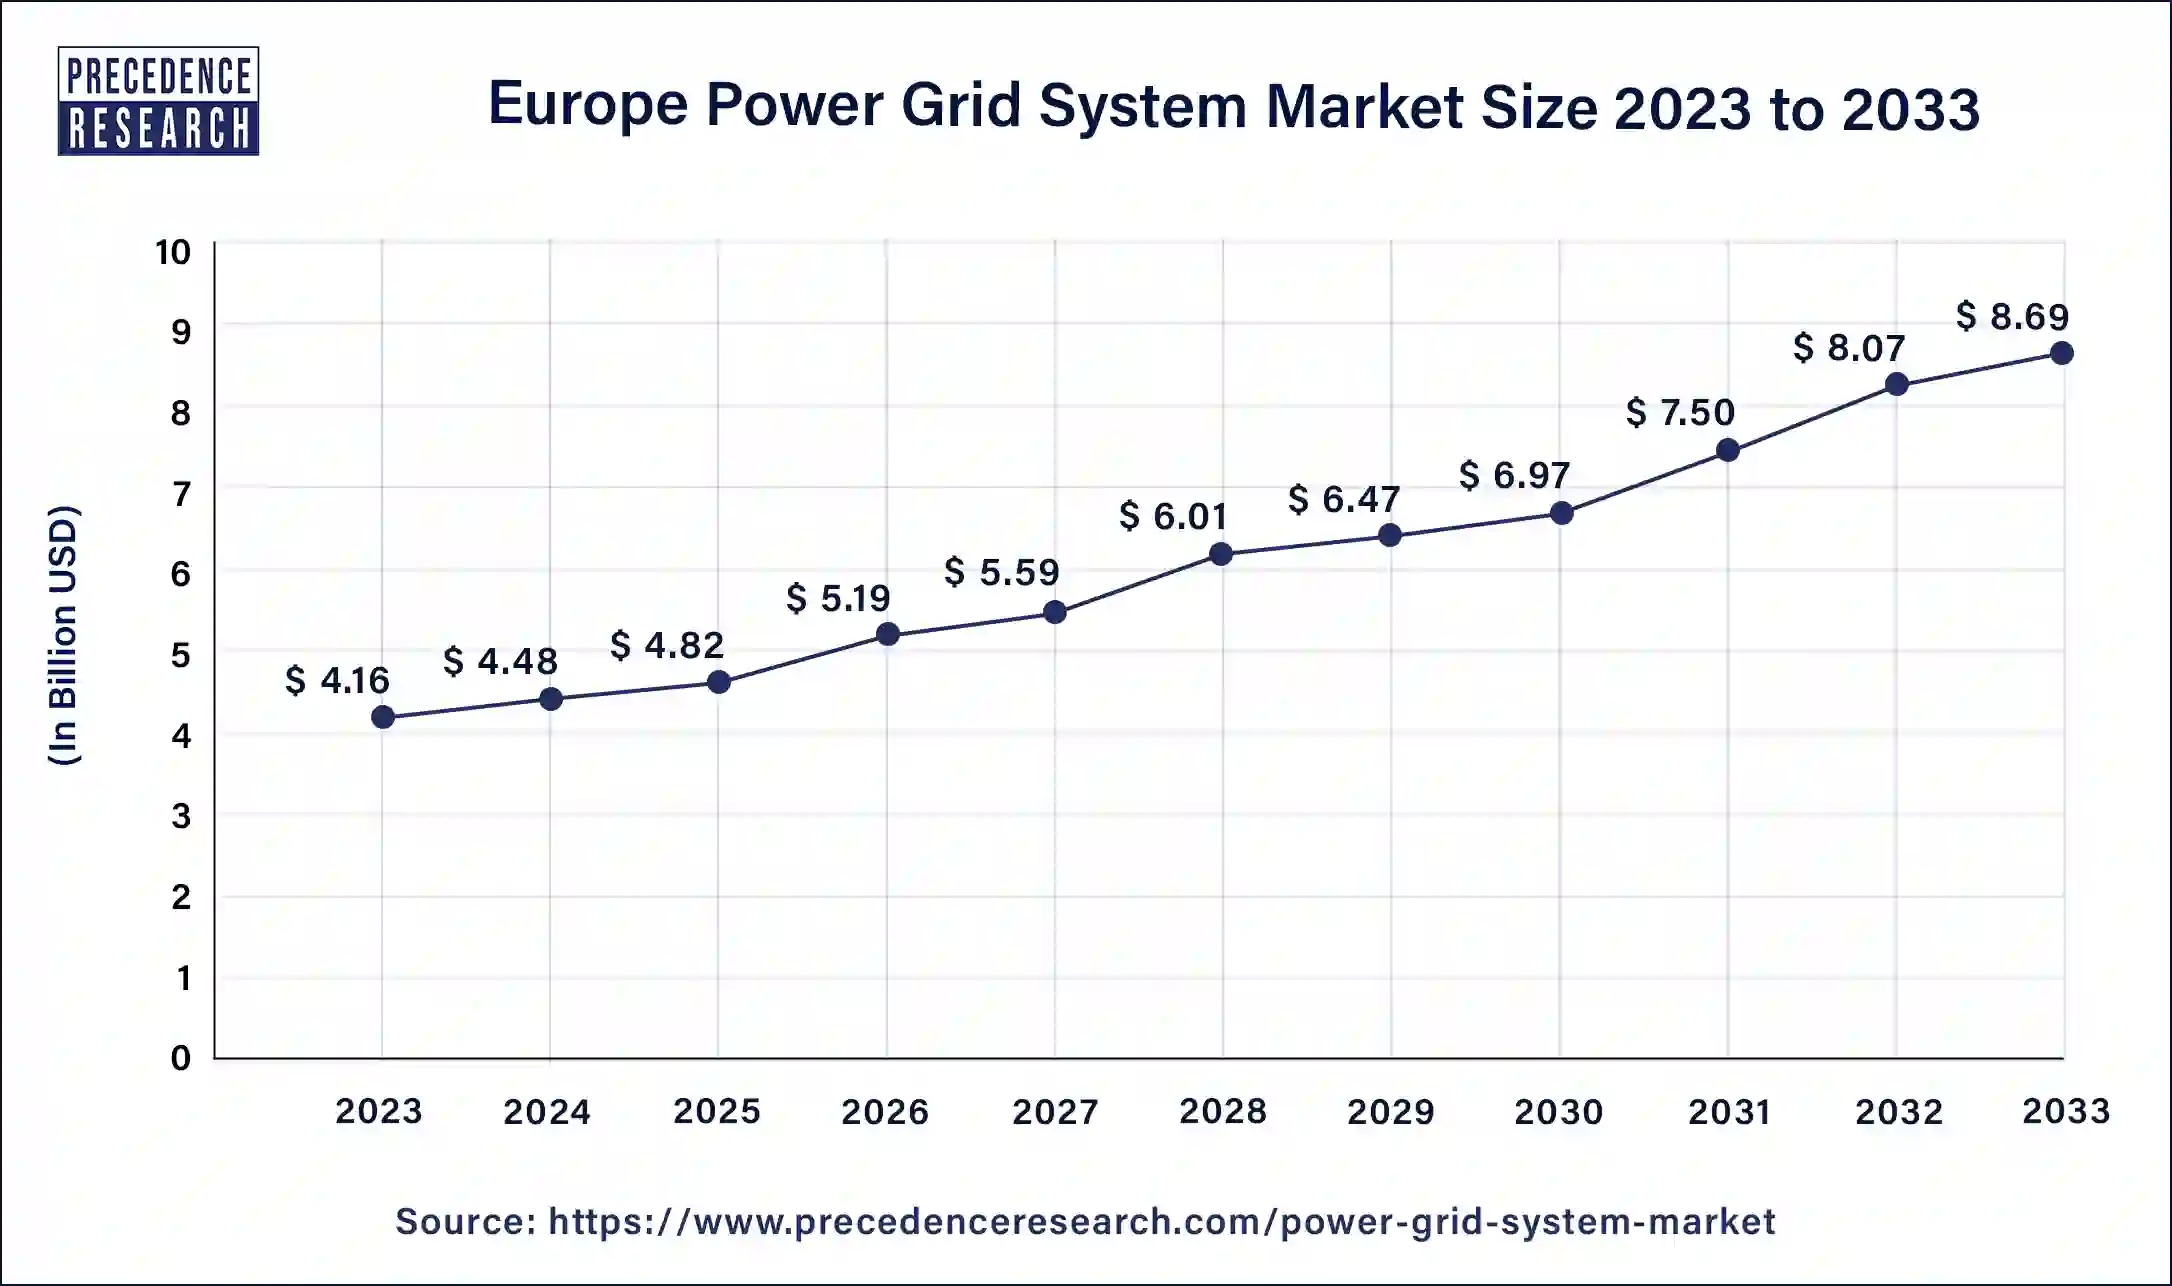 Europe Power Grid System Market Size 2024 to 2033